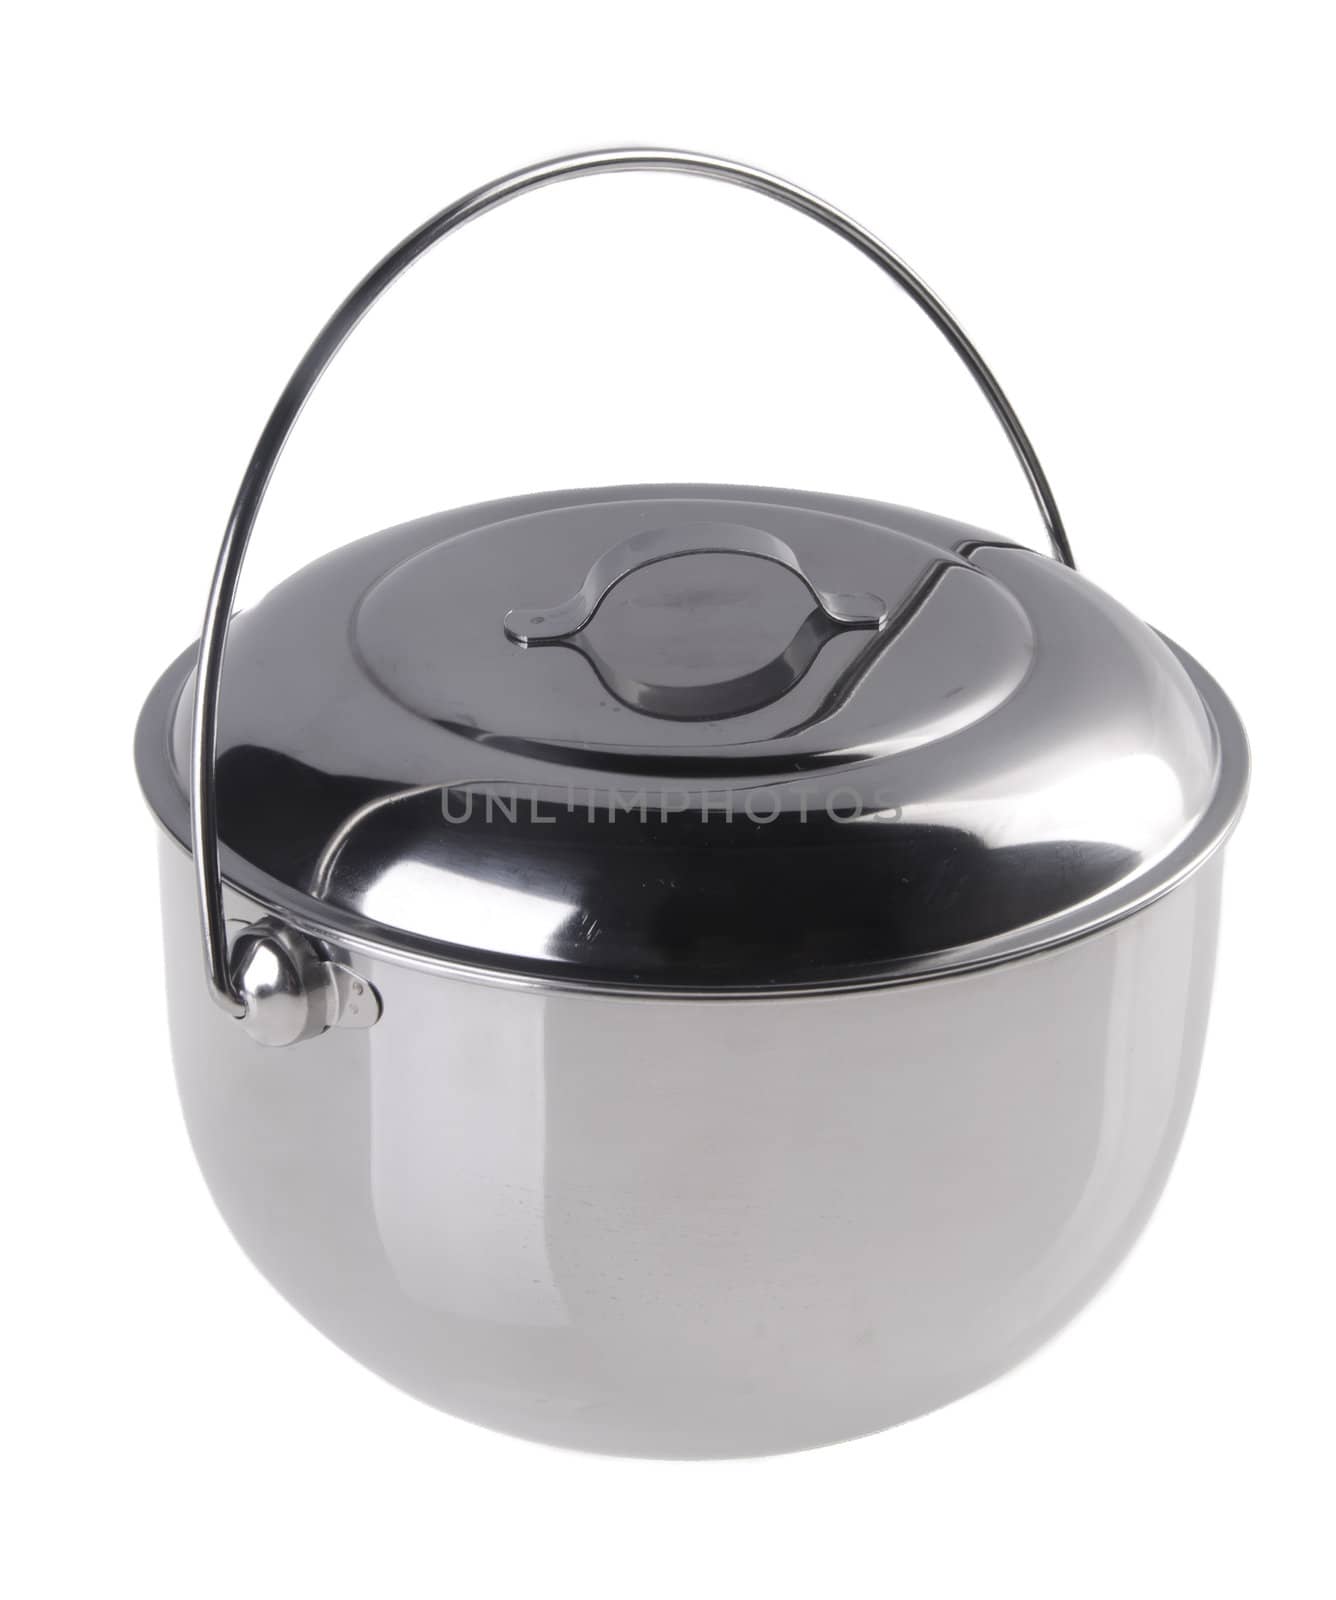 pot, Stainless steel pot on white background